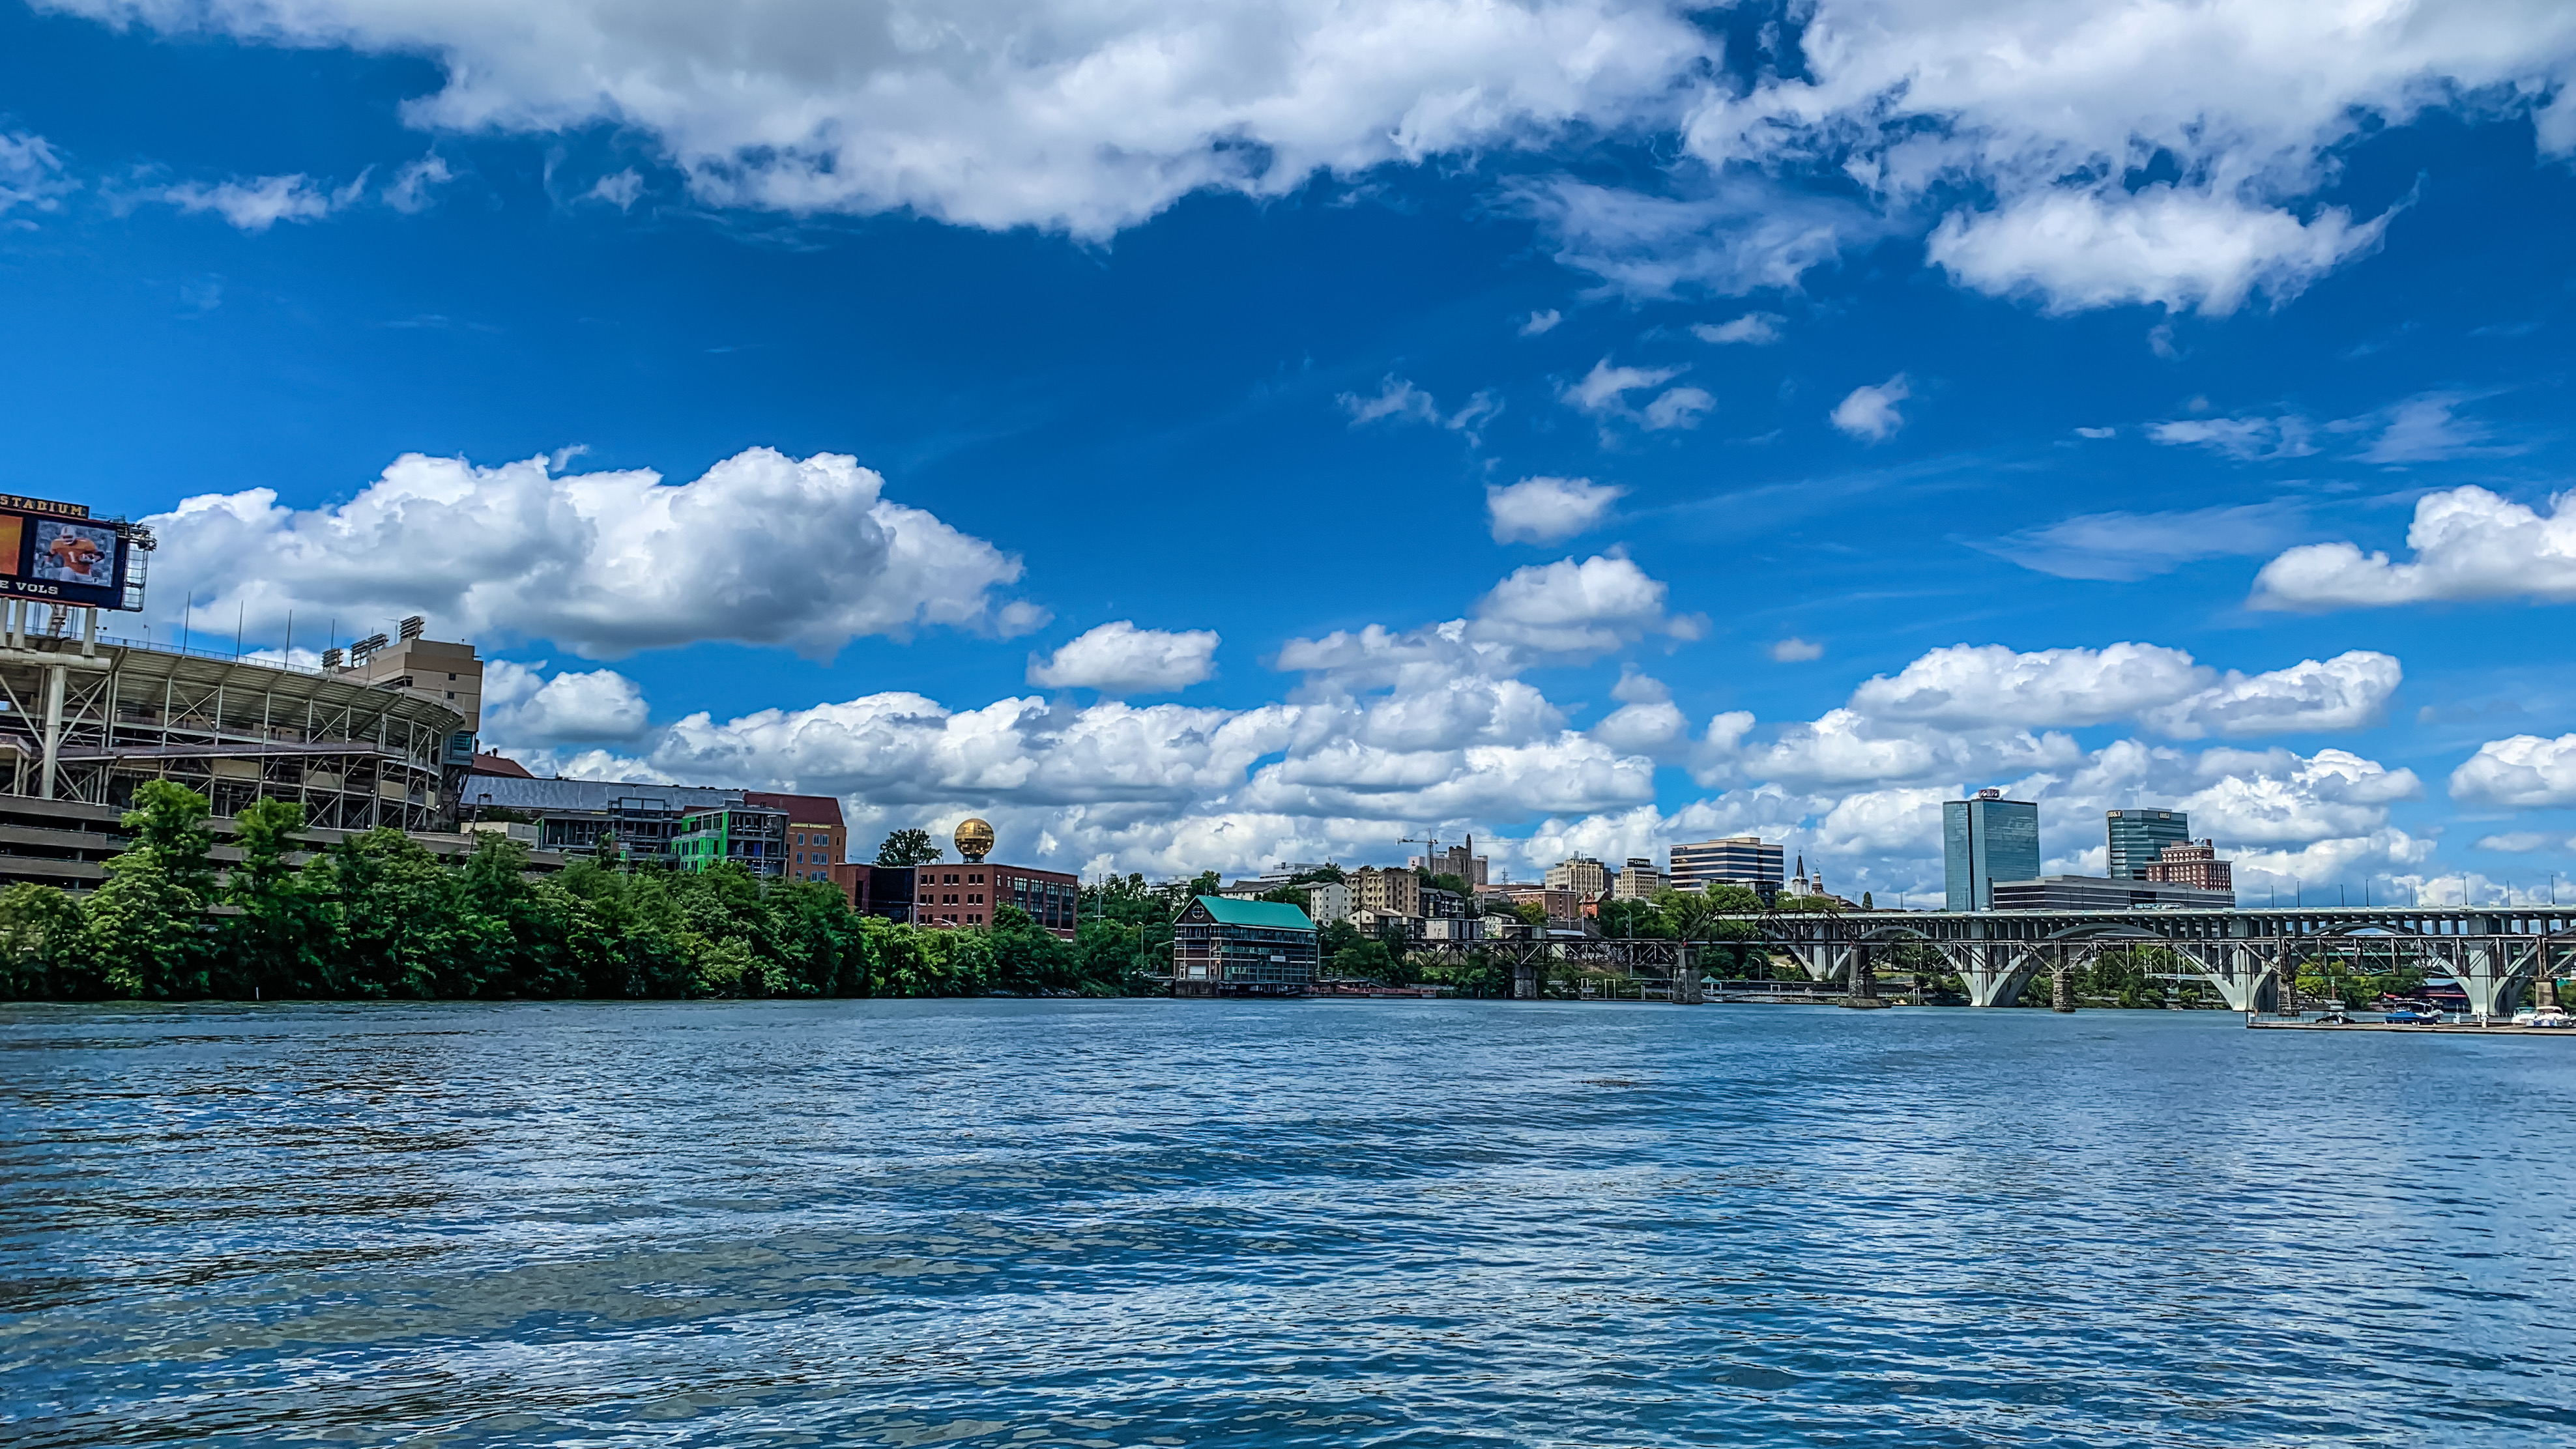 File:Knoxville skyline from Tennessee River.jpg - Wikipedia